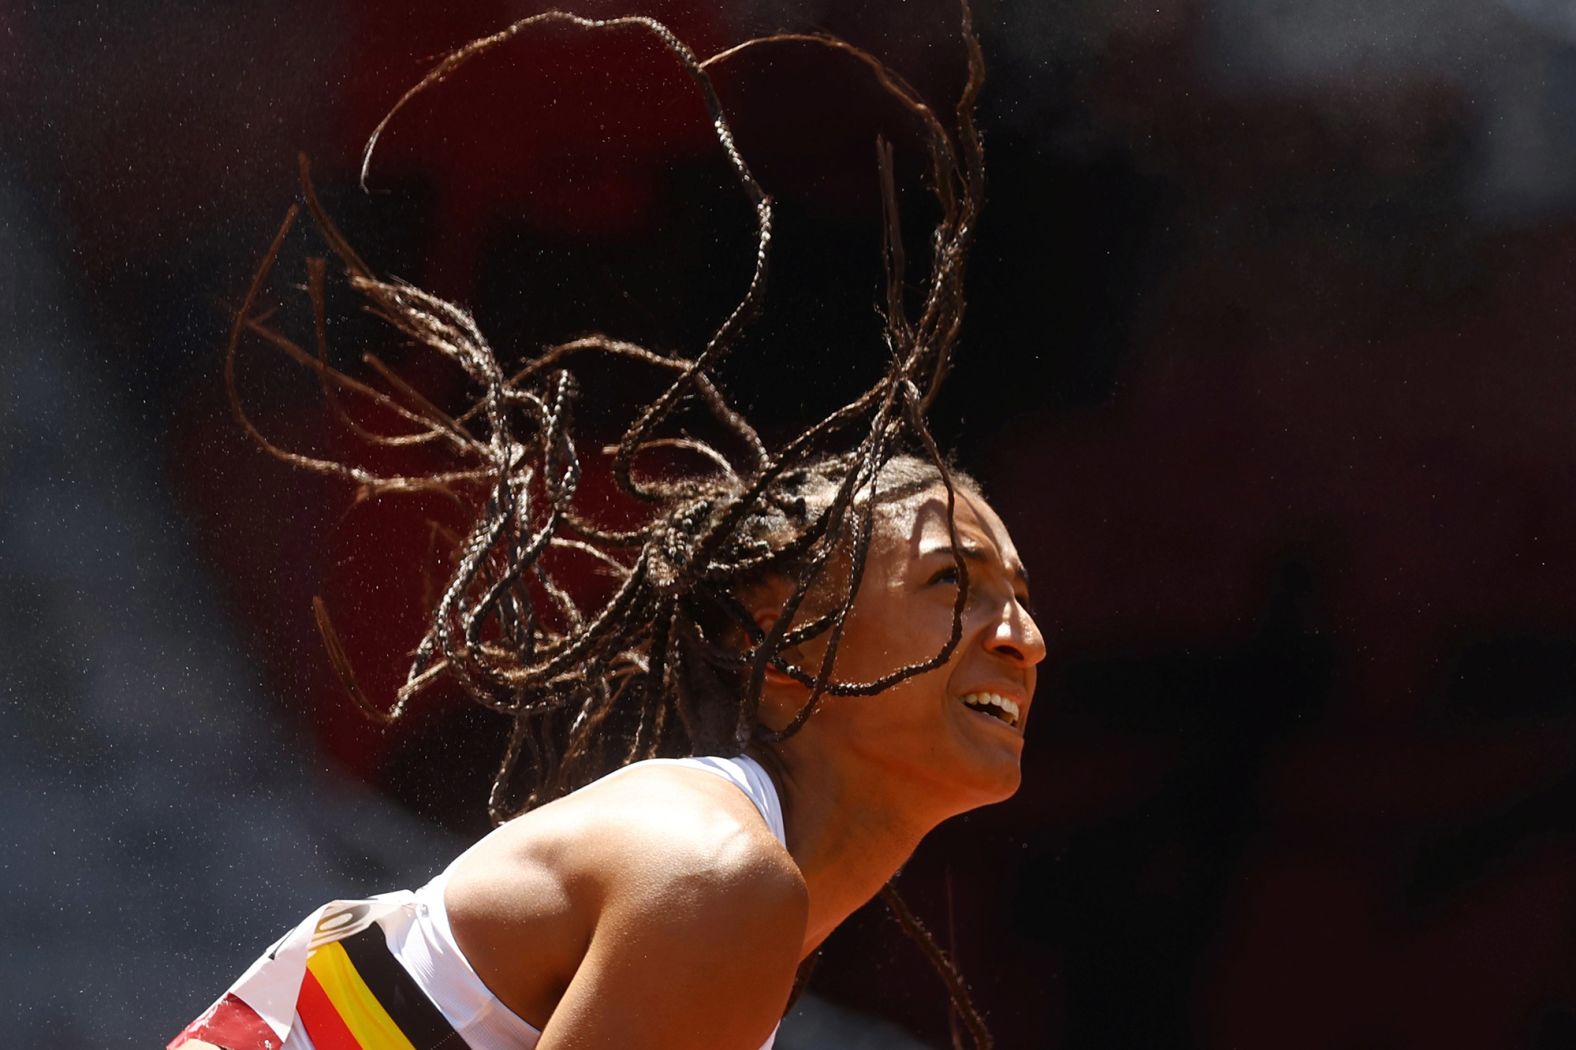 Belgium's Nafissatou Thiam throws a javelin on her way to <a href="index.php?page=&url=https%3A%2F%2Fwww.cnn.com%2Fworld%2Flive-news%2Ftokyo-2020-olympics-08-05-21-spt%2Fh_982943442a366f096662fafb4971fa2e" target="_blank">winning gold in the heptathlon</a> on August 5. She's just the second woman ever to win back-to-back heptathlon titles.